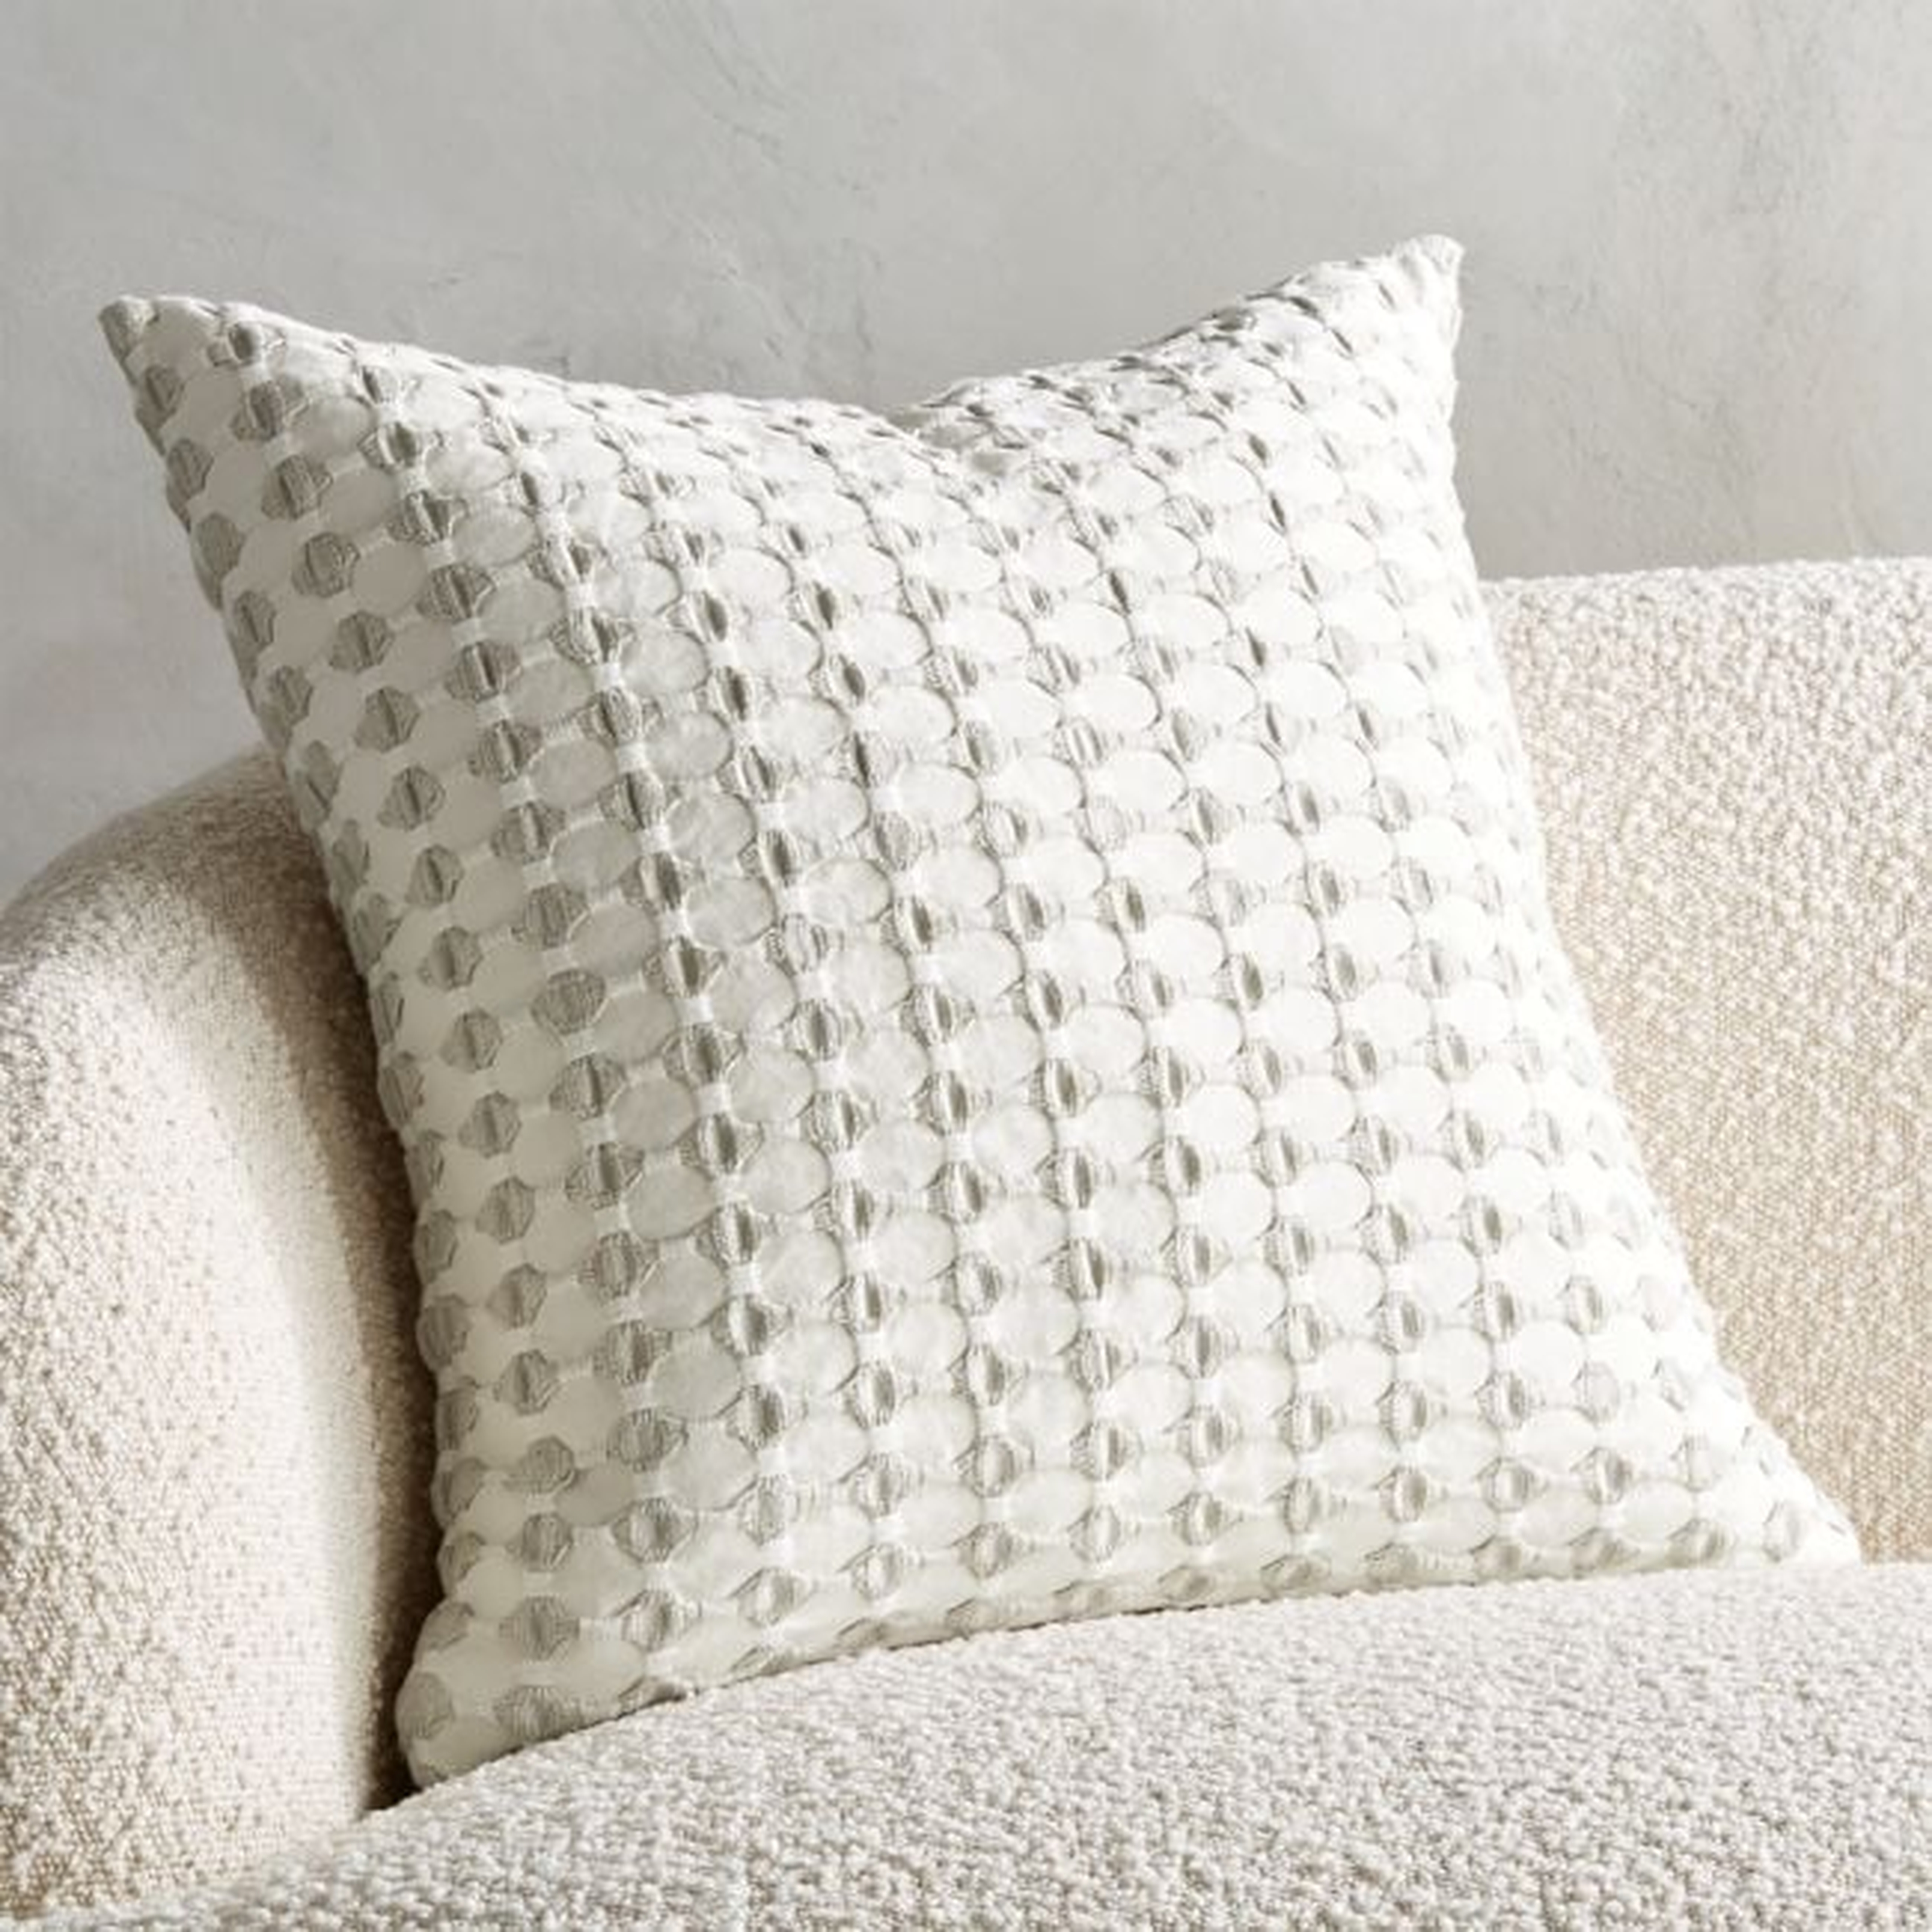 20" Estela Grey and White Pillow with Feather-Down Insert - CB2